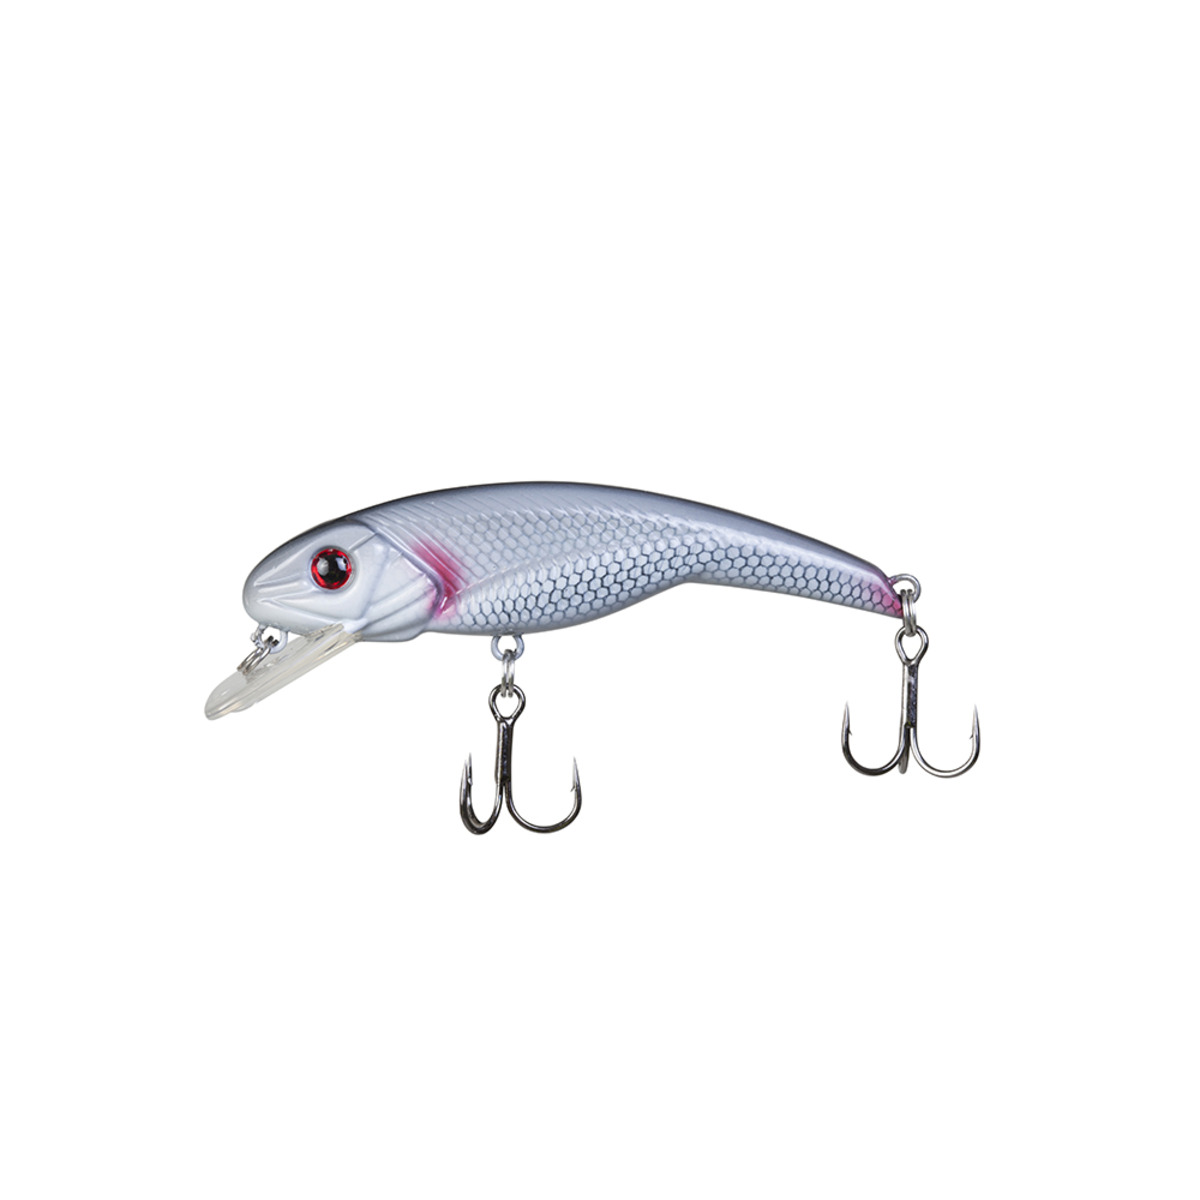 Korum Double Hard Lures  Midwater Shad - Silverfish 10 cm